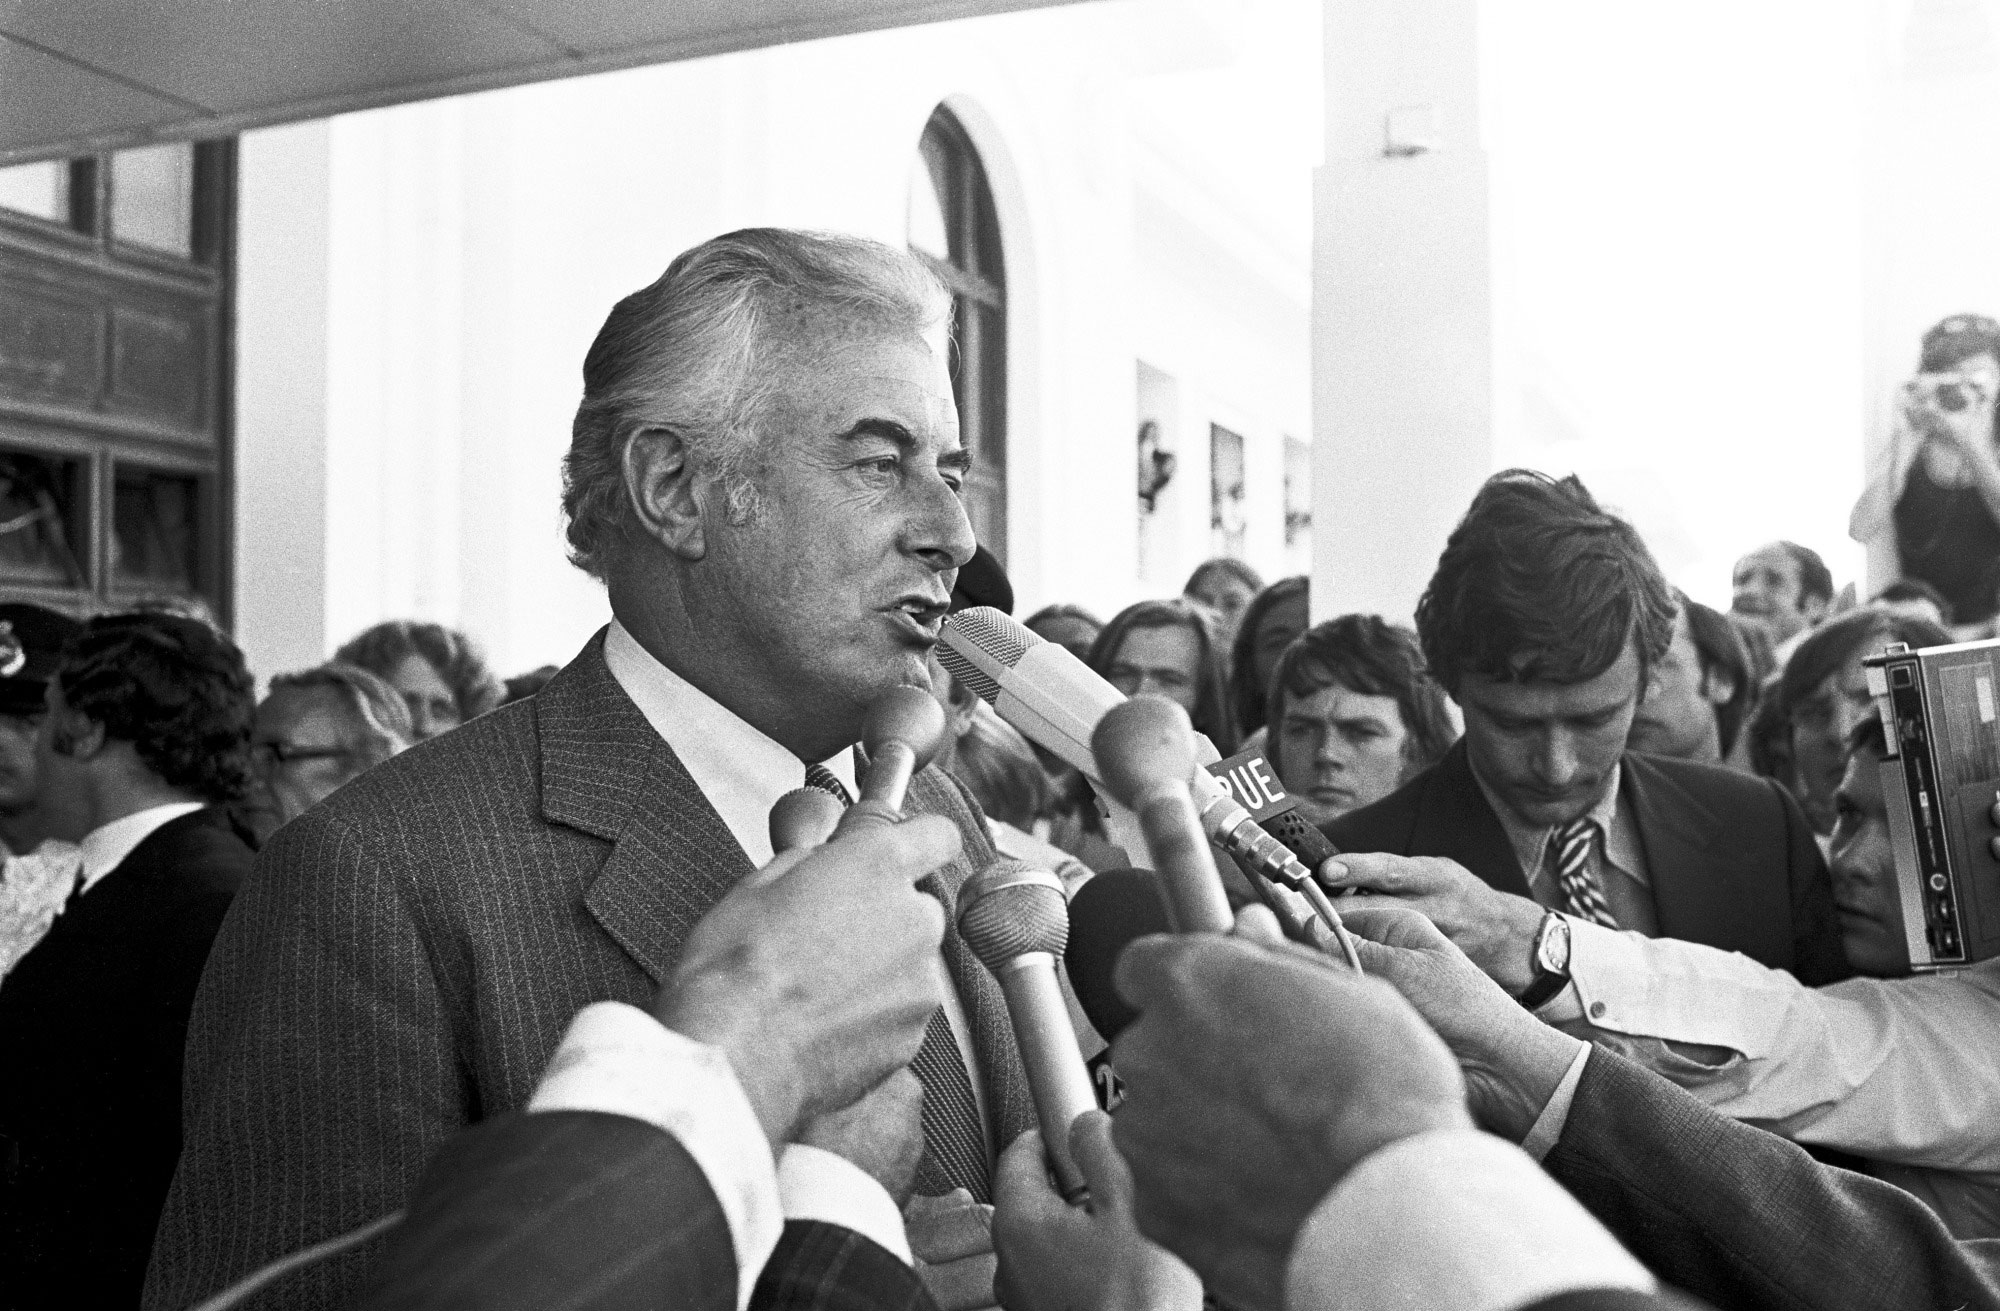 Gough Whitlam speaking after the dismissal of his government, 11 November 1975
